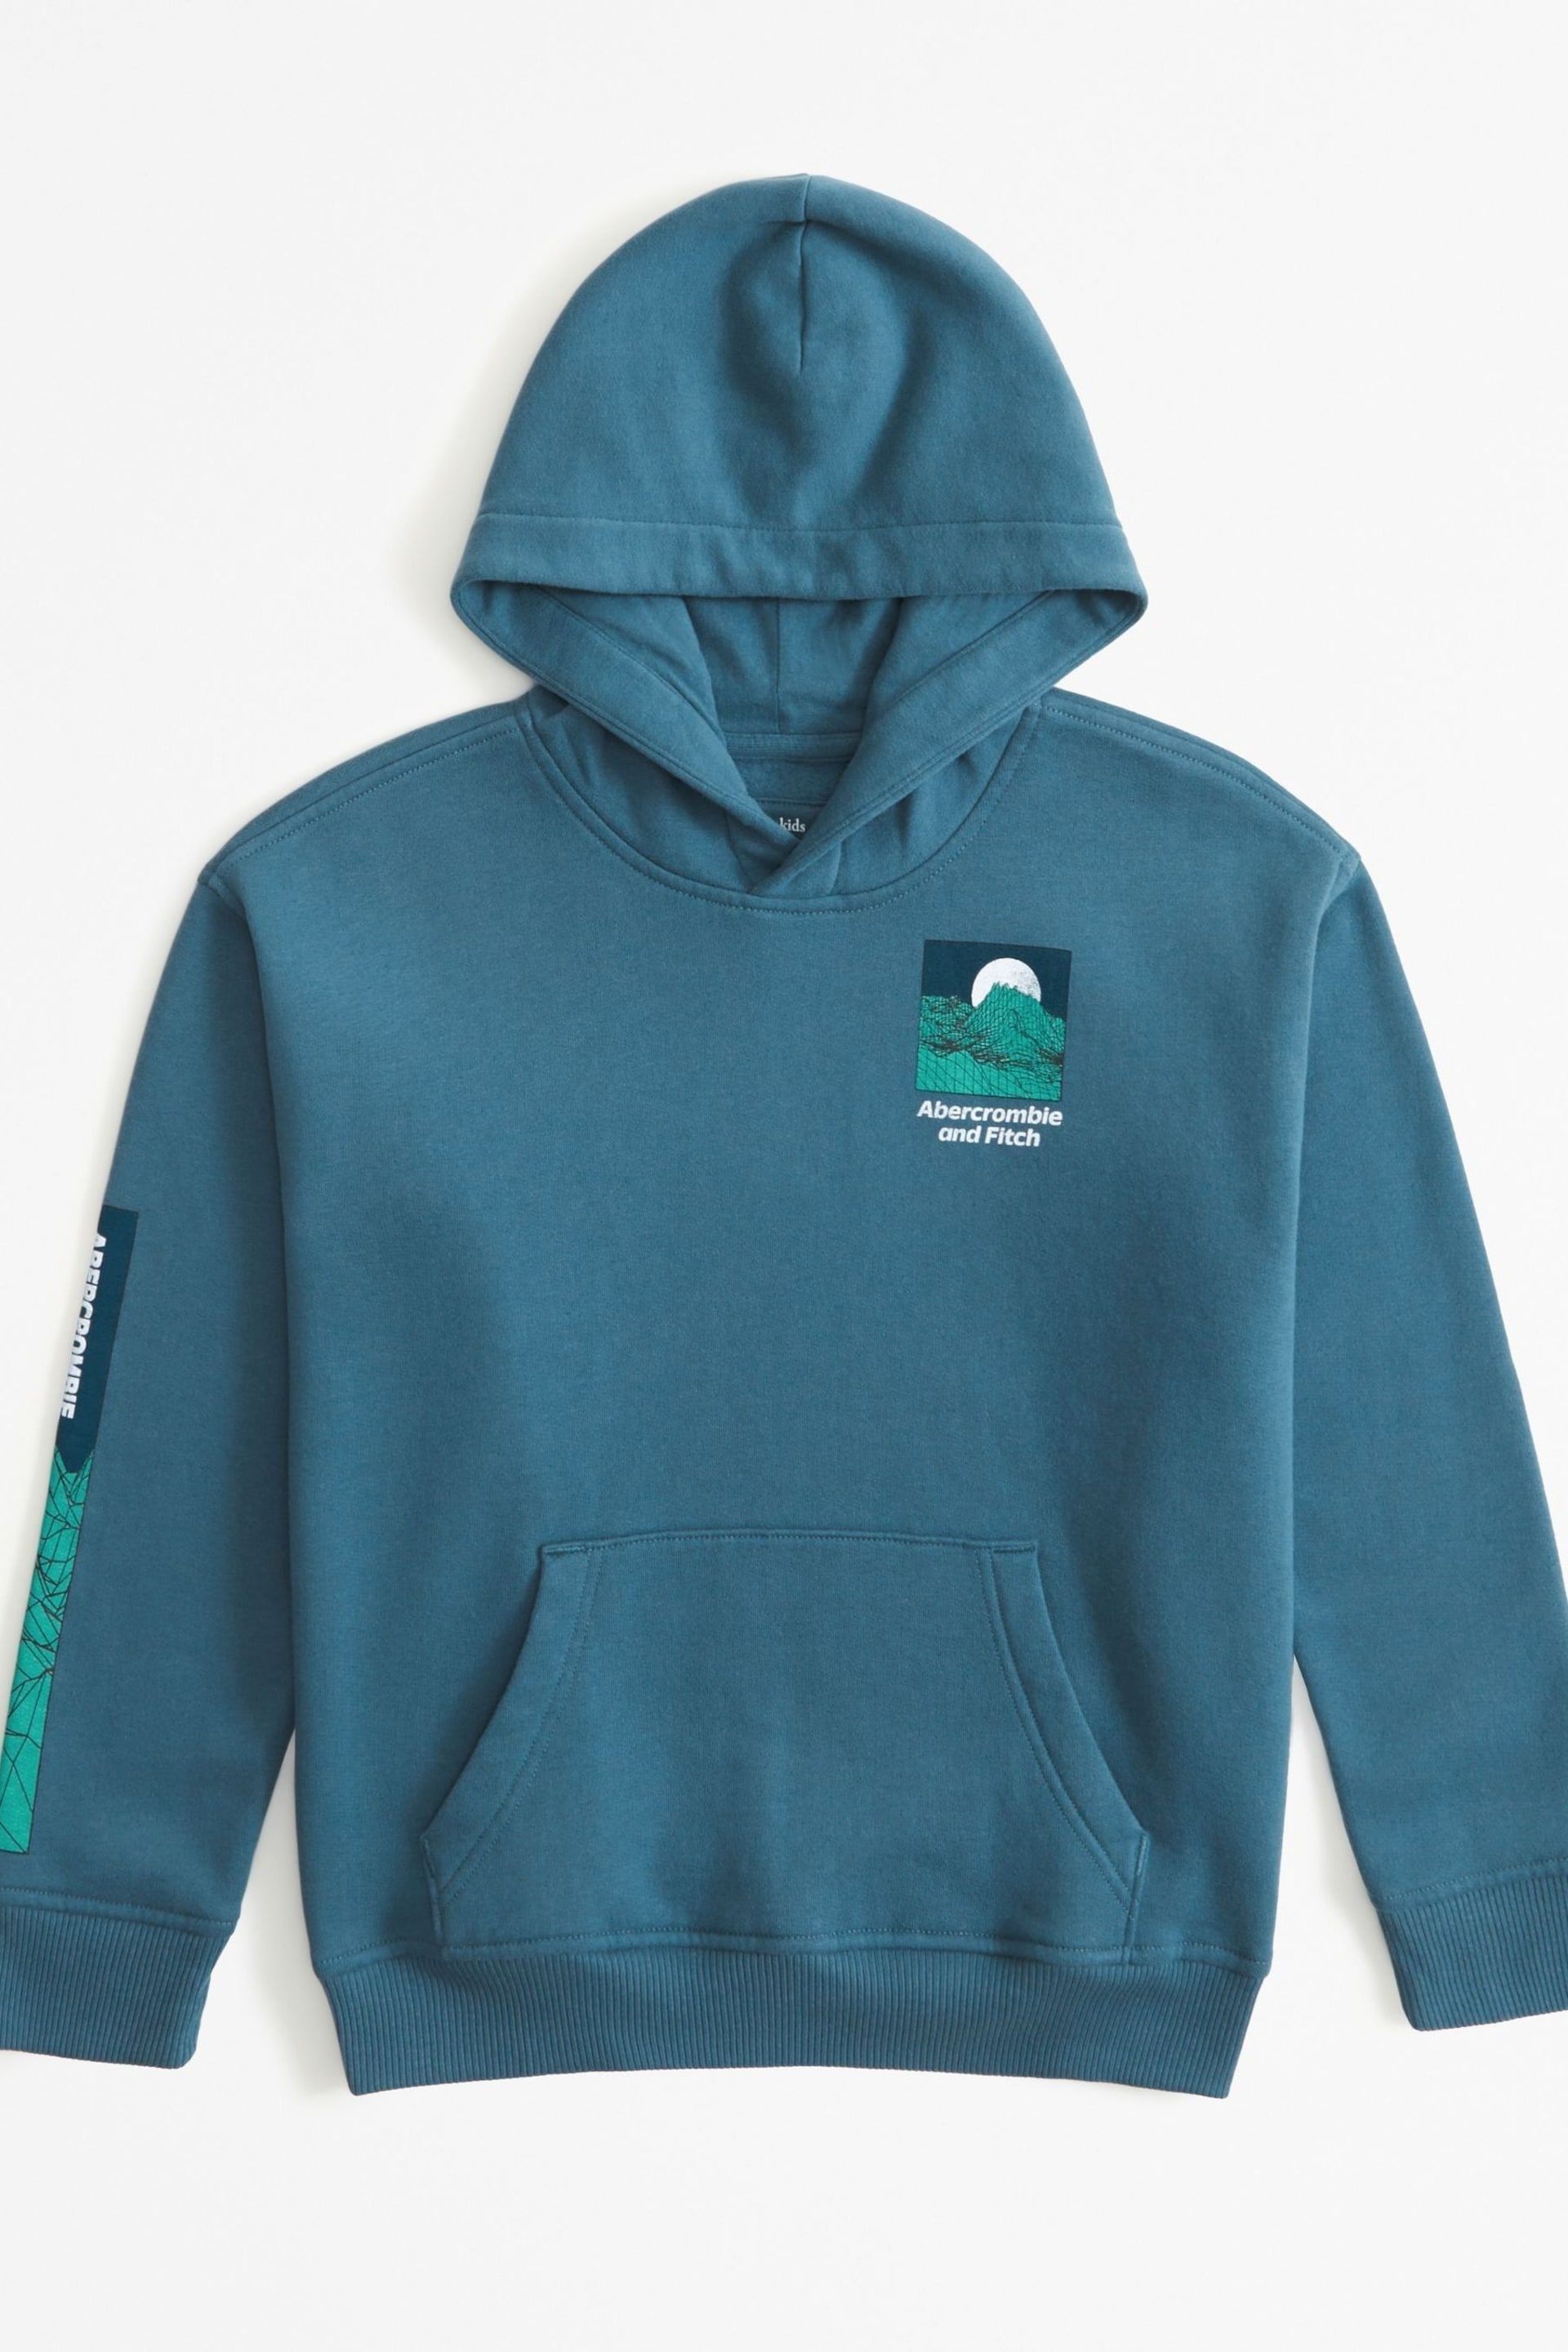 Abercrombie & Fitch Blue Logo Back Print Hoodie - Image 1 of 2